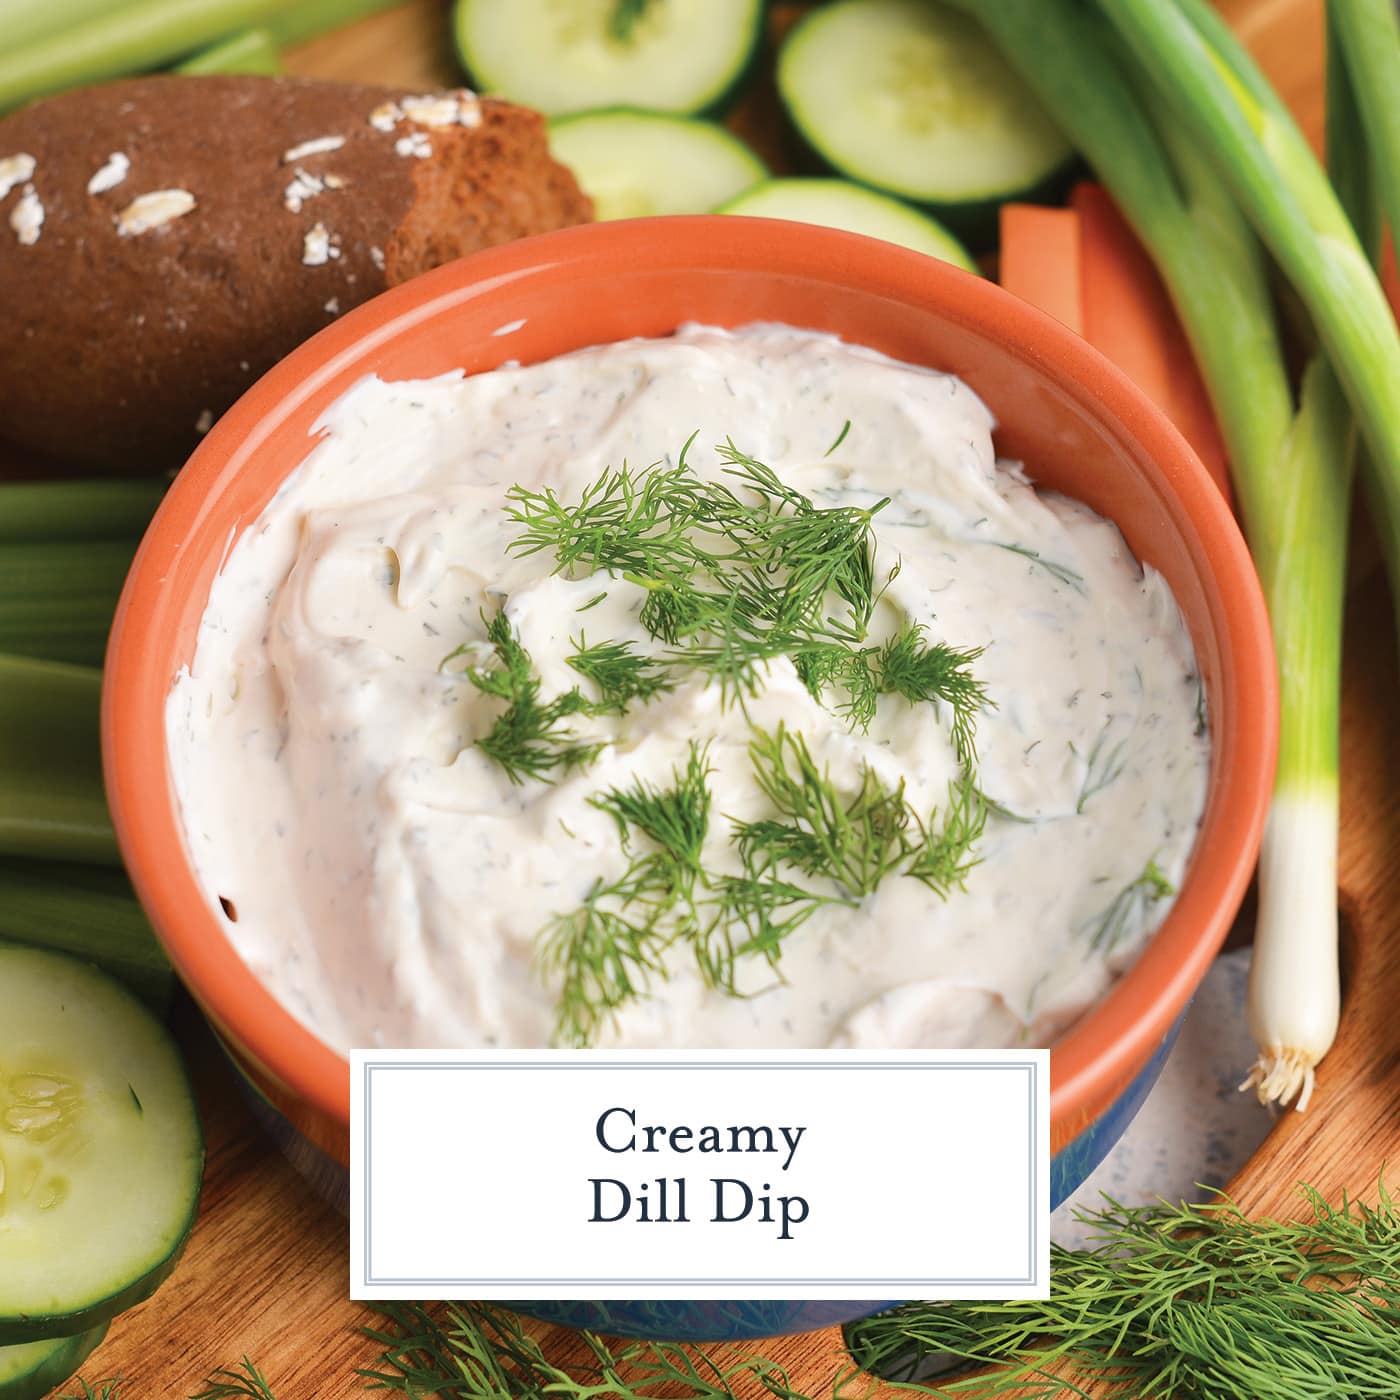 angled hot of bowl of dill dip with text overlay for facebook